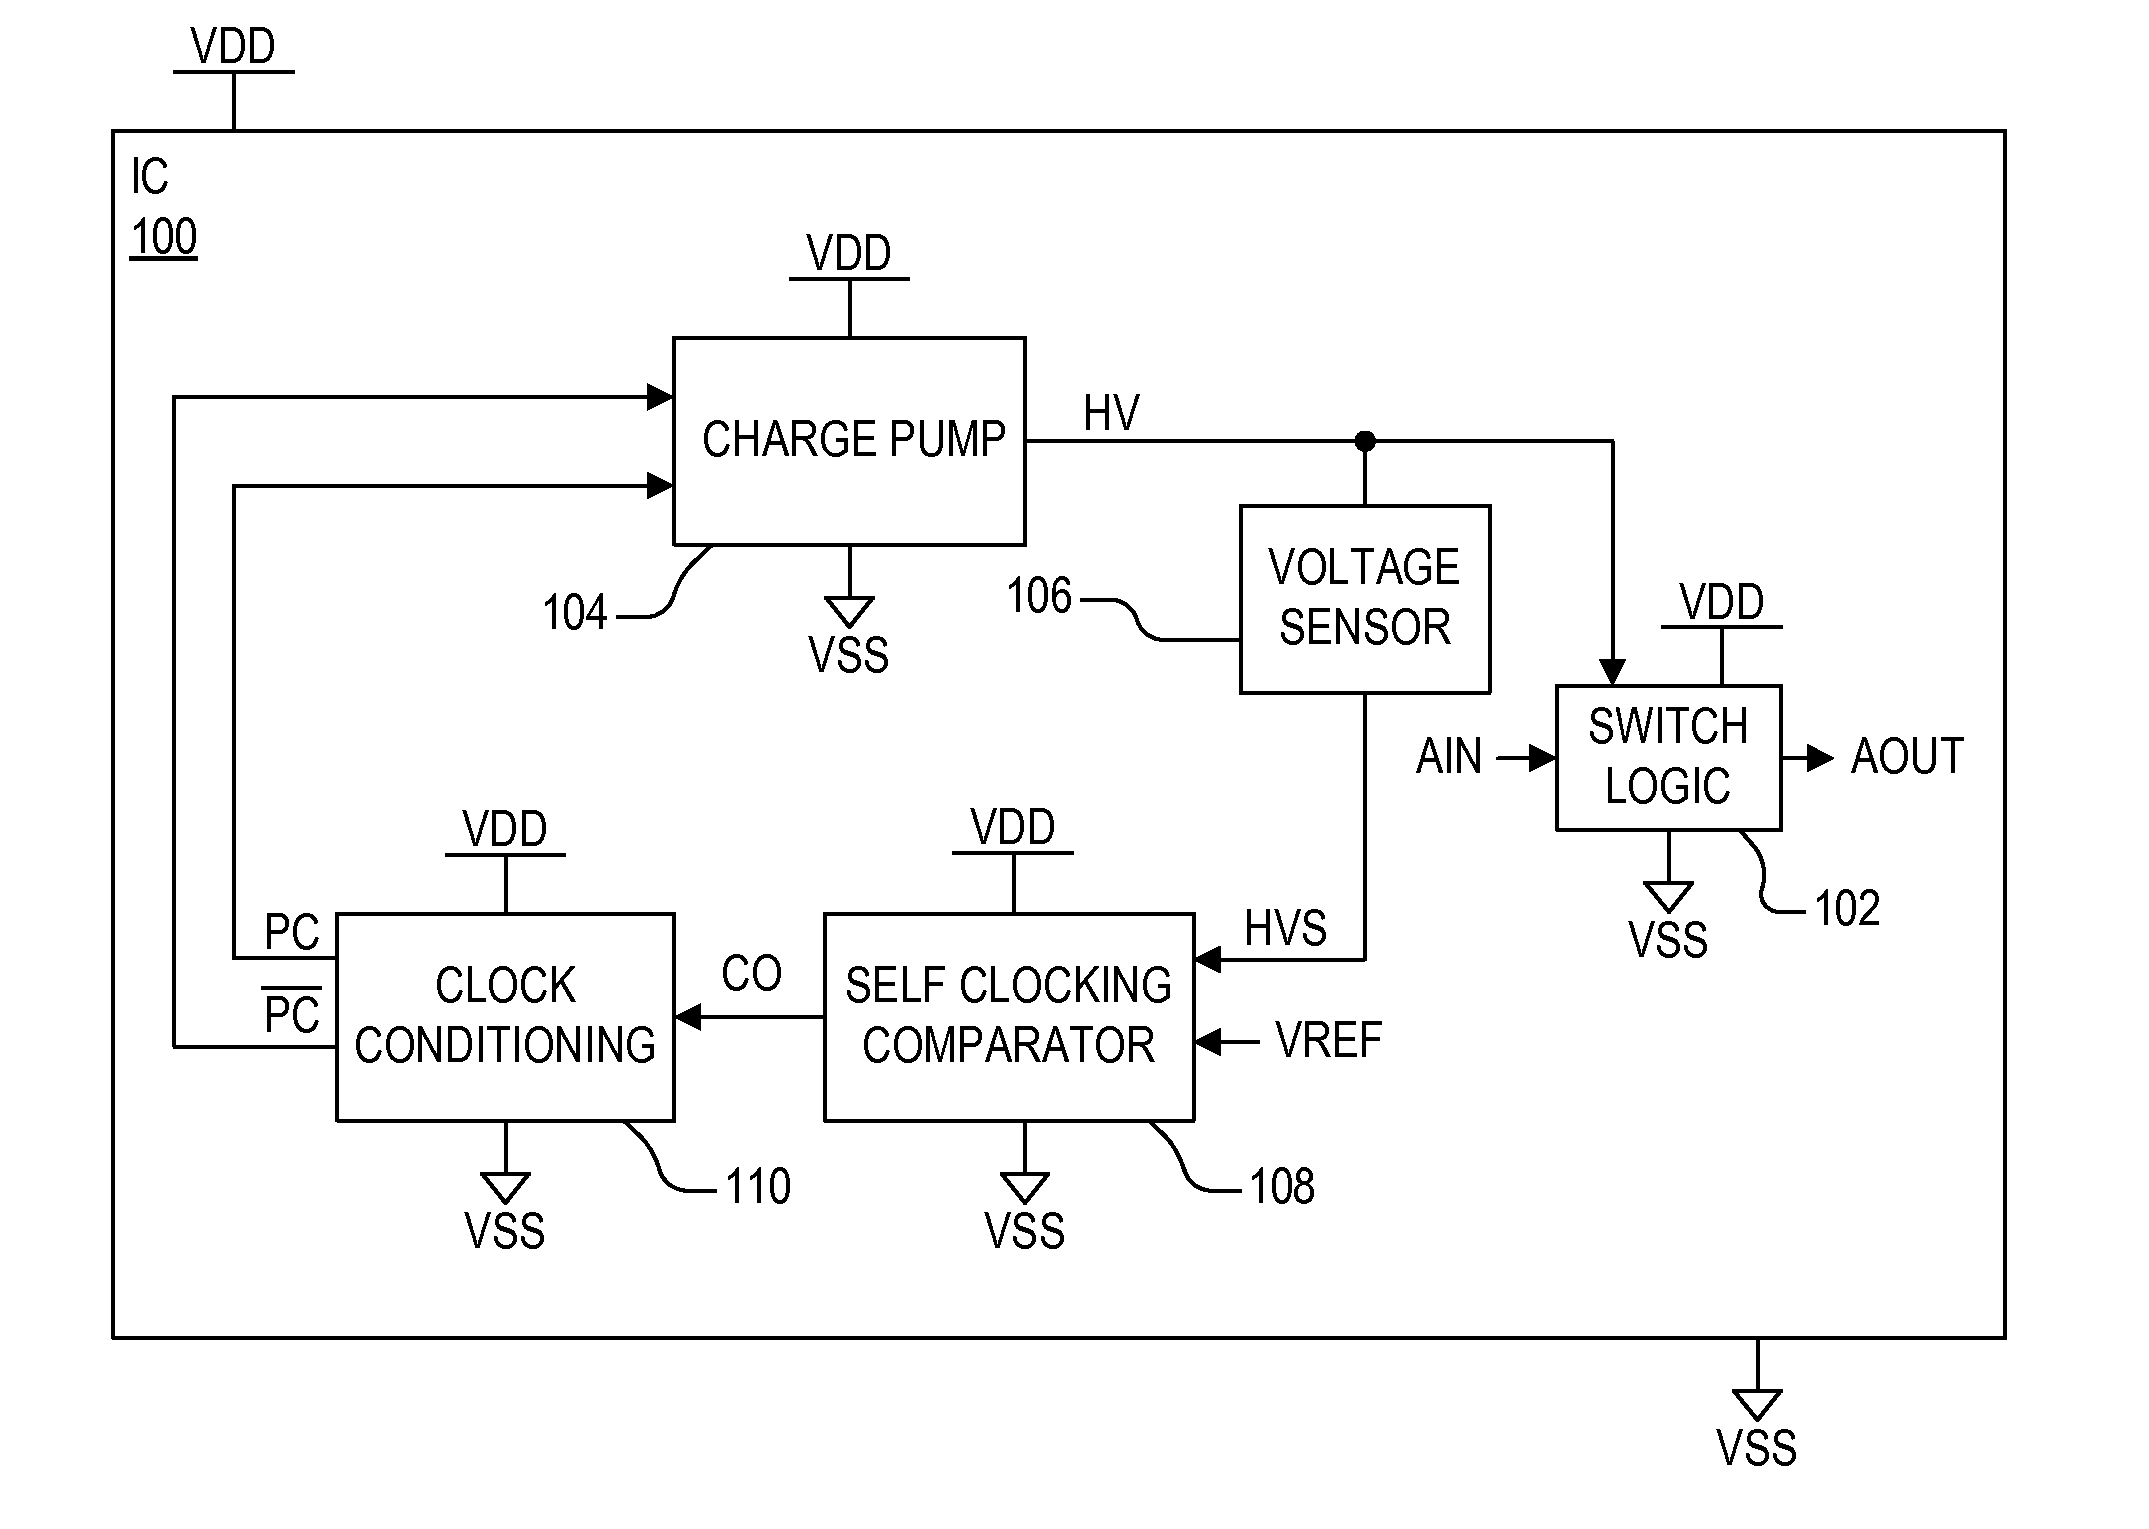 Self clocking comparator for a charge pump